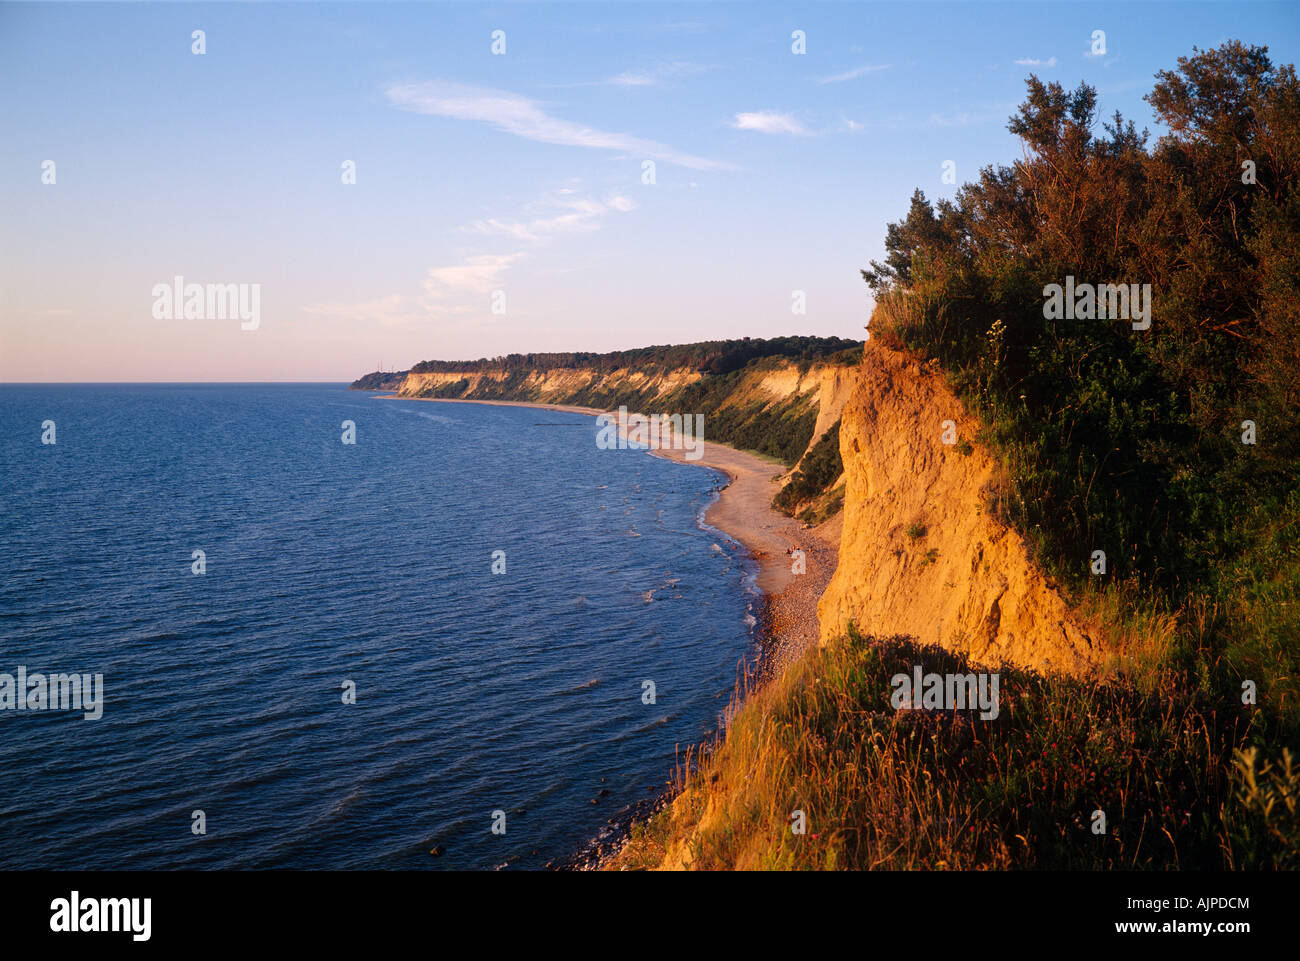 Sunset at the baltic sea (Kaliningrad Oblast, russian exclave). The cliffs of the AMBER COAST reach a hight of nearly 200 feet. Stock Photo